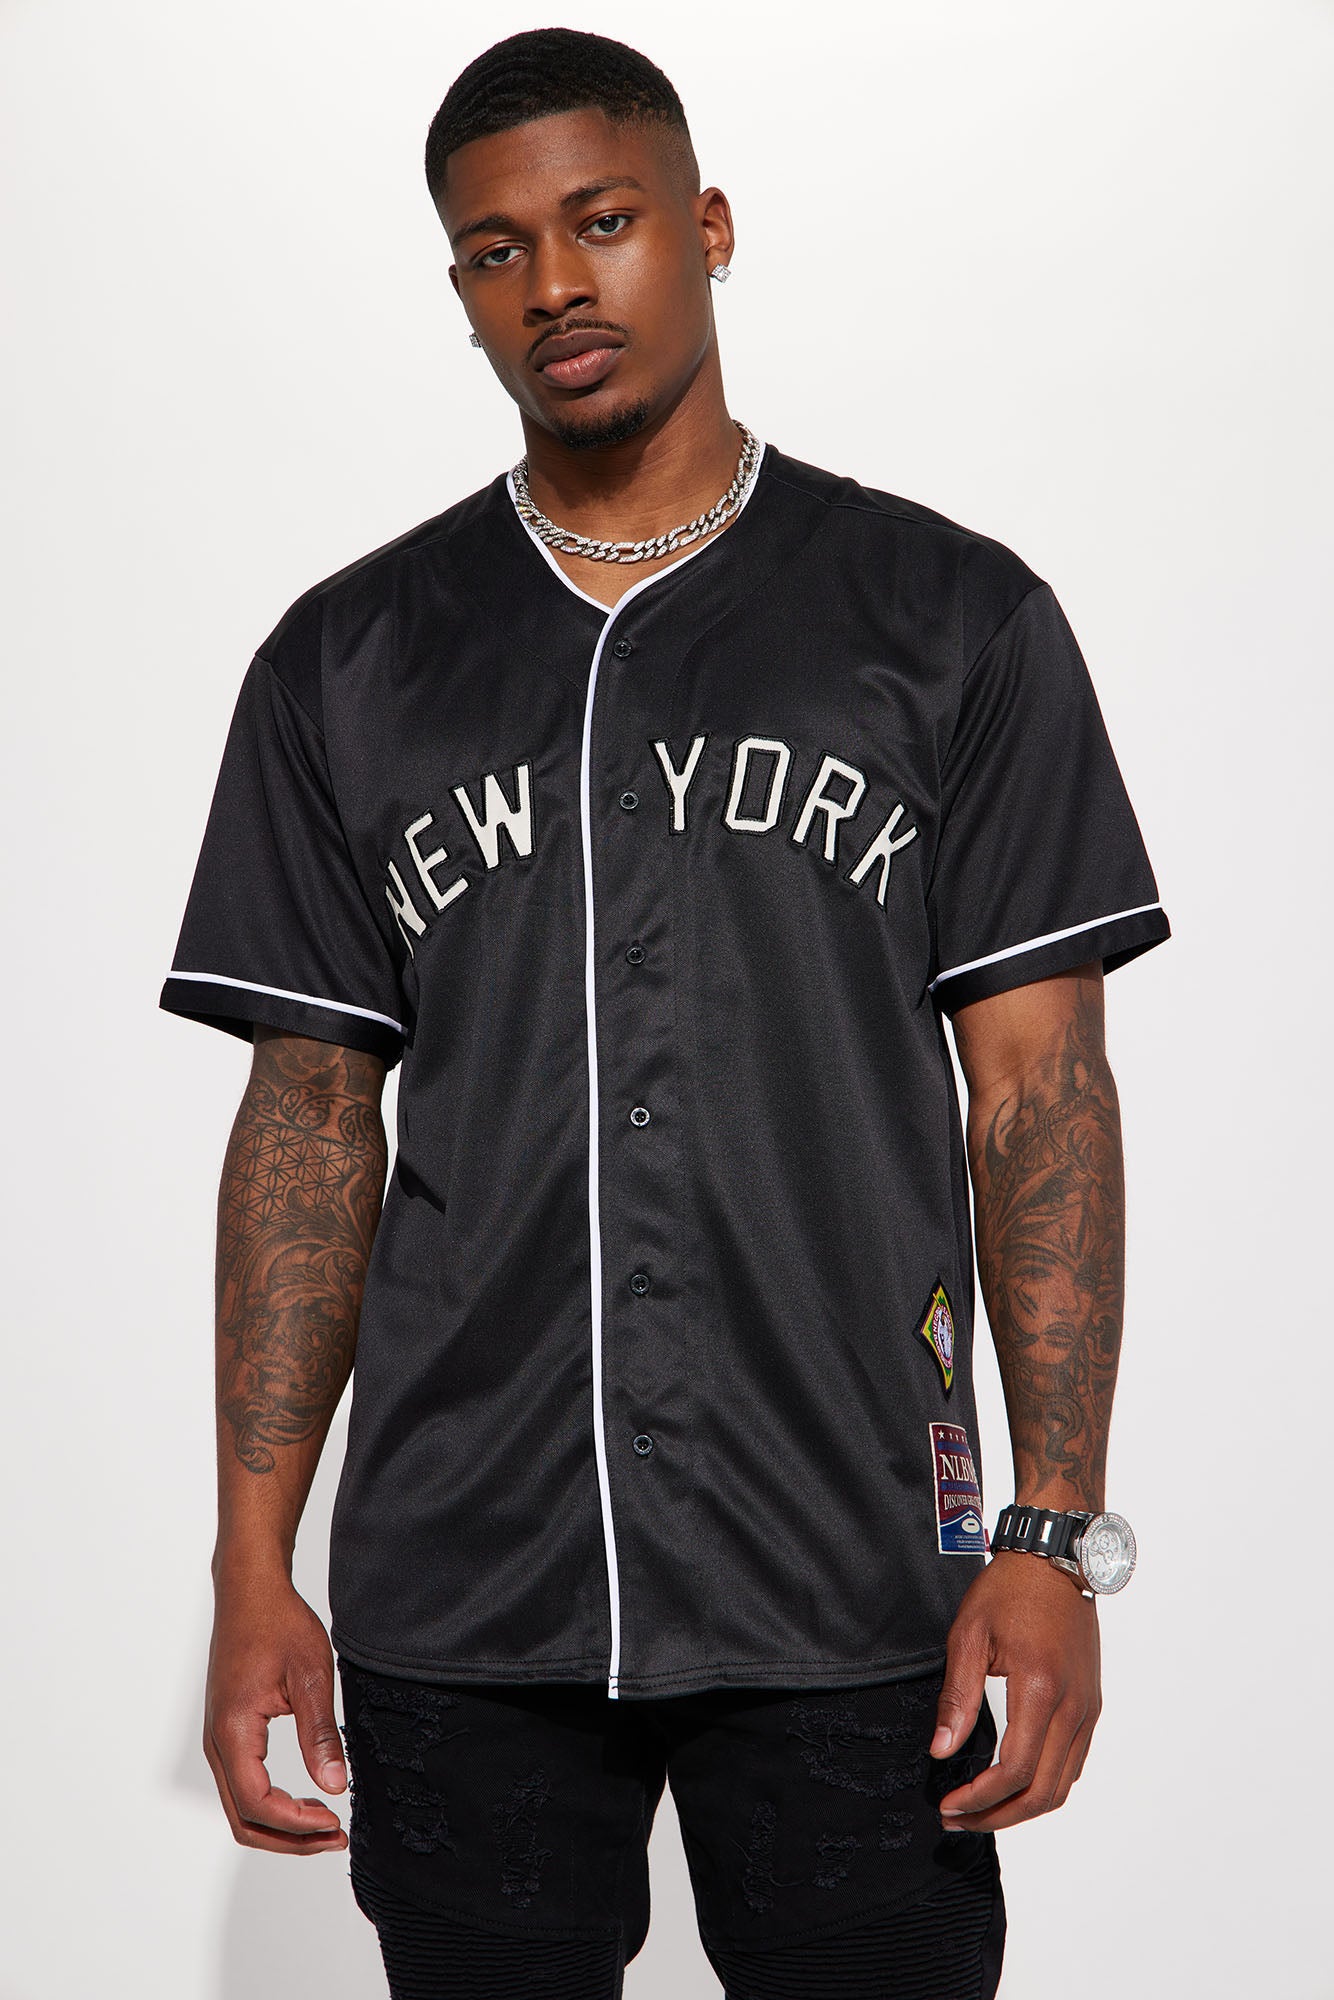 men's yankees jersey outfit